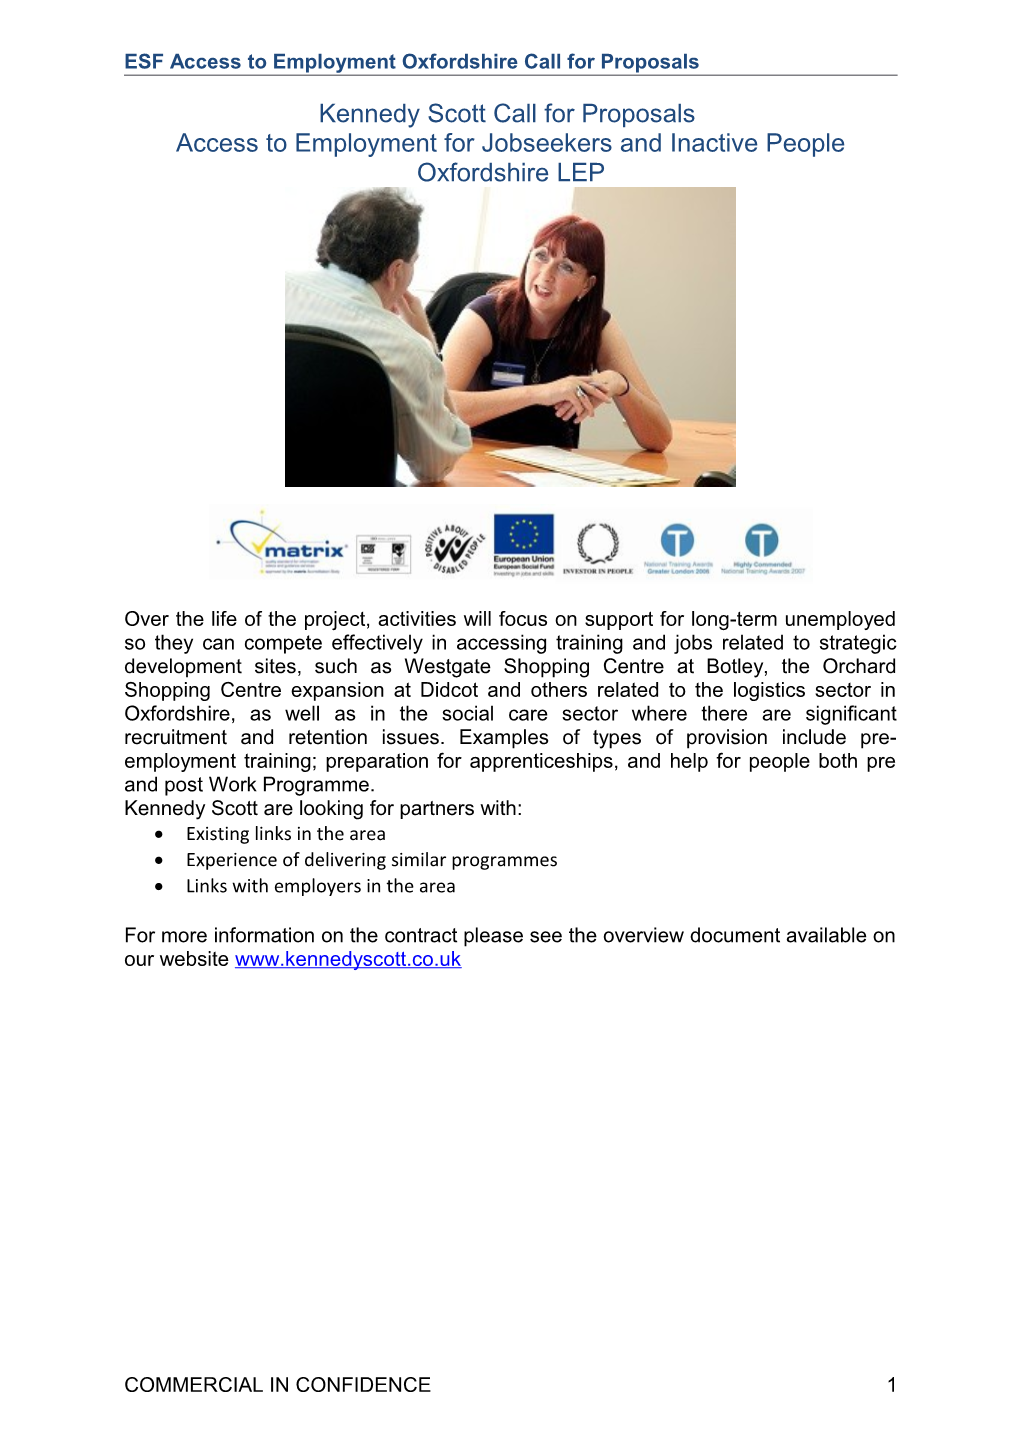 ESF Access to Employment Oxfordshire Call for Proposals